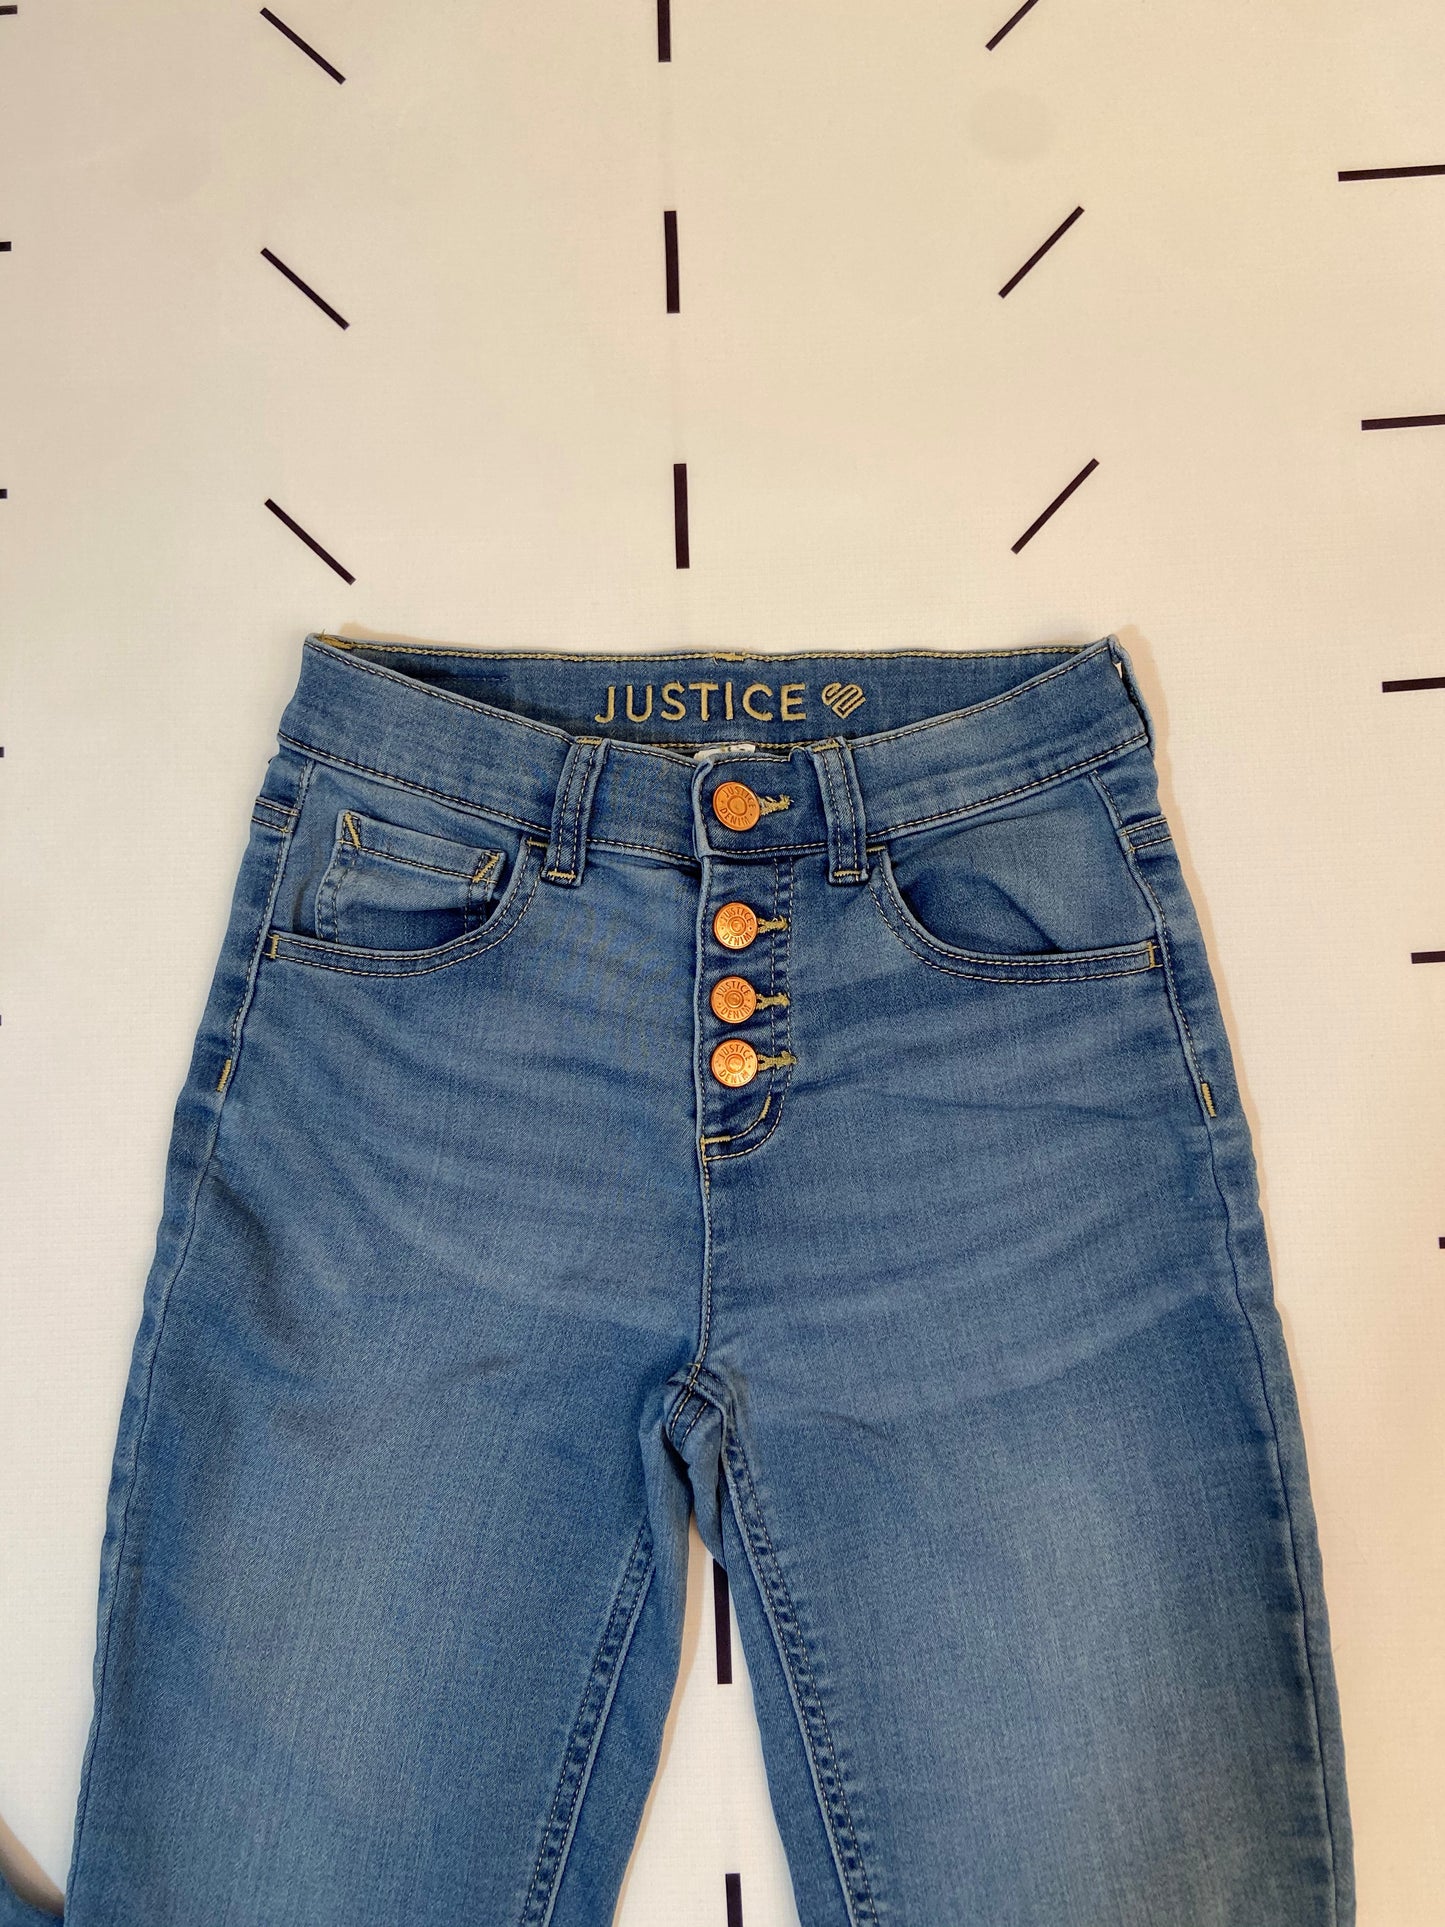 Justice Jeggings - Youth 12 Plus